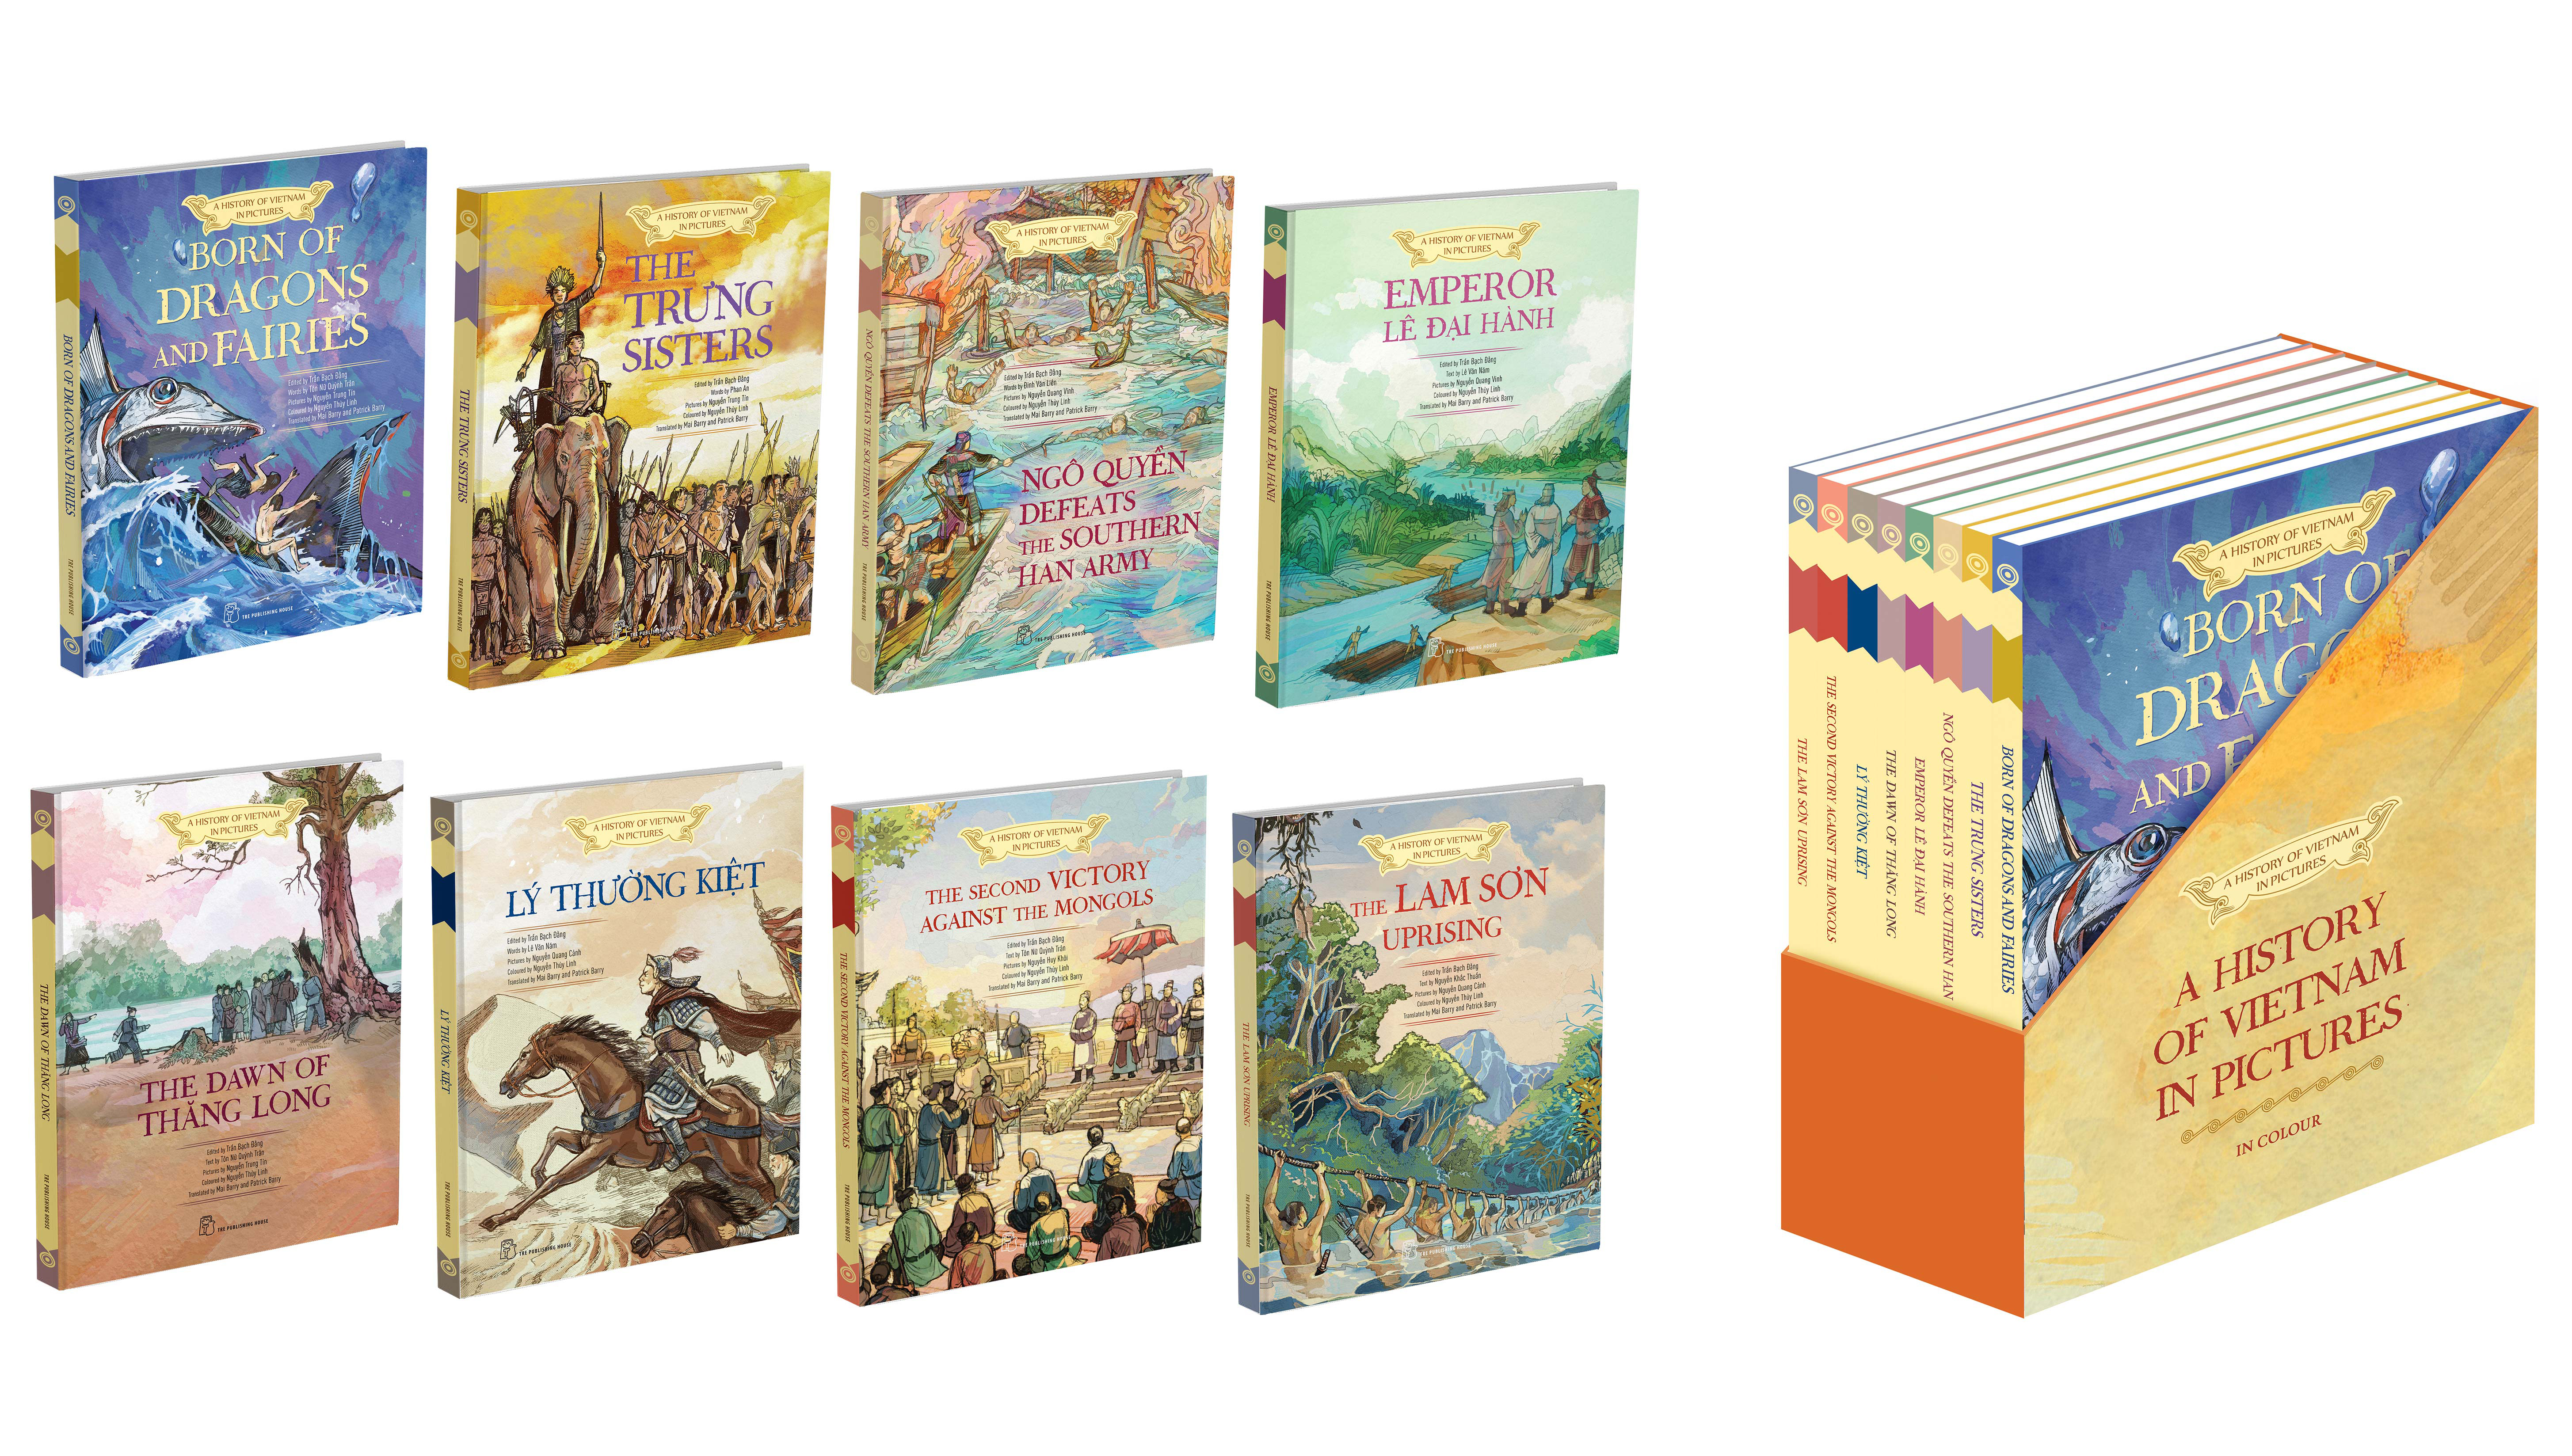 Publisher releases picture books on Vietnamese history in English